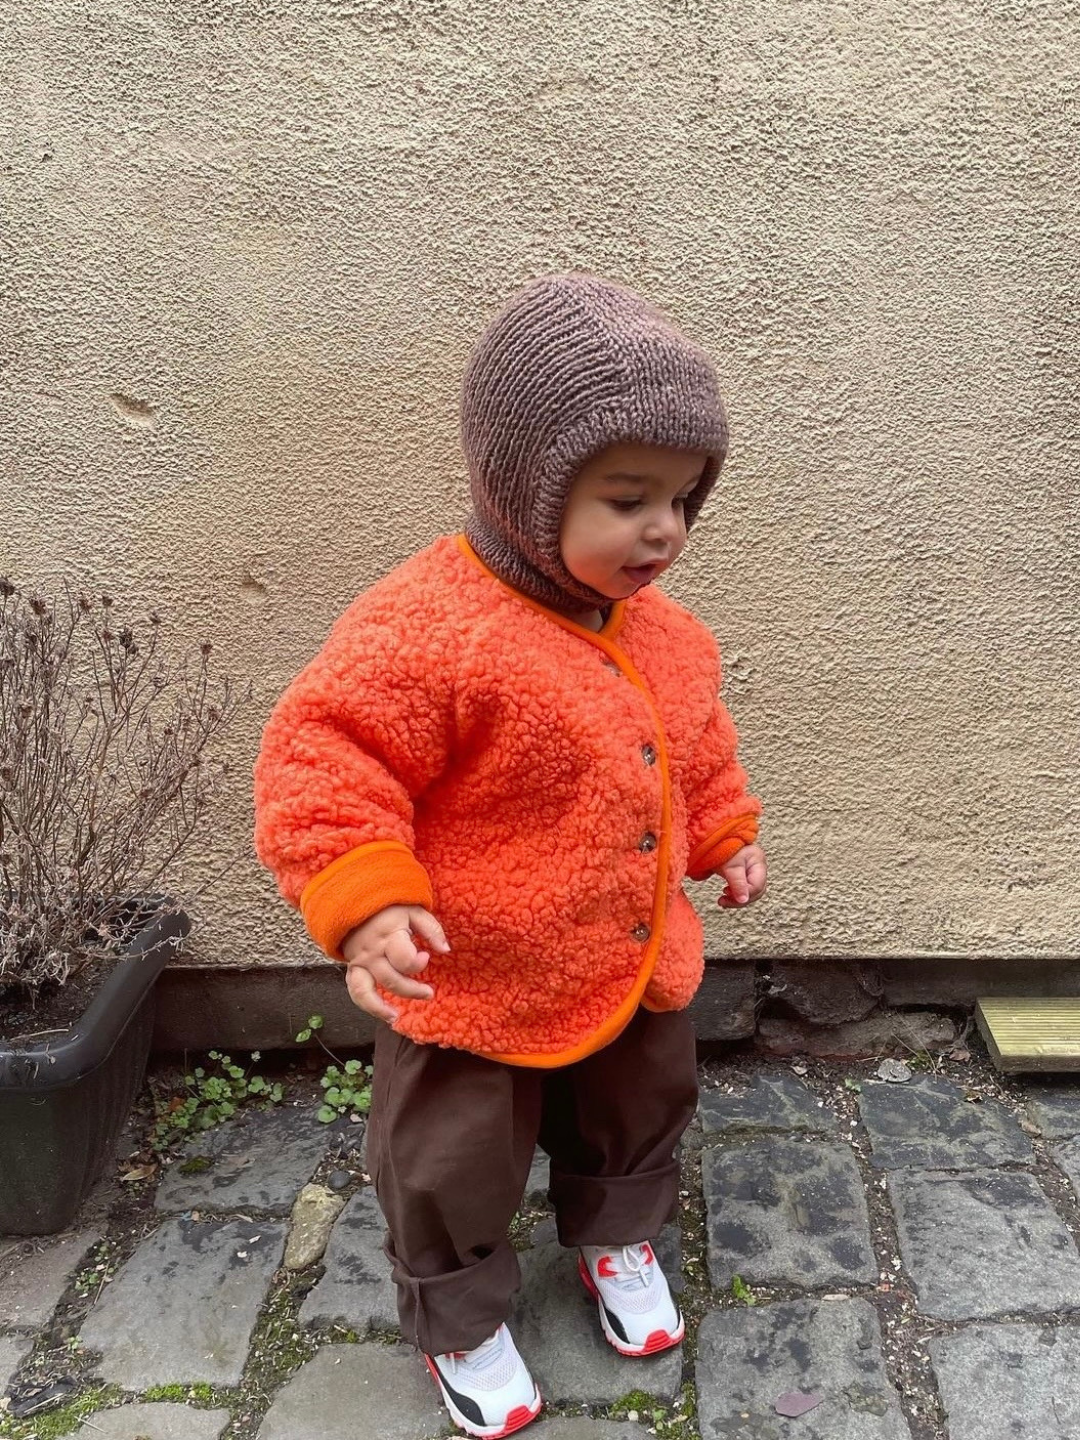 A toddler wearing an orange collarless fleece jacket with four brown buttons, with a brown hat, brown pants and white sneakers, standing on a paved outdoor floor, against a beige wall..